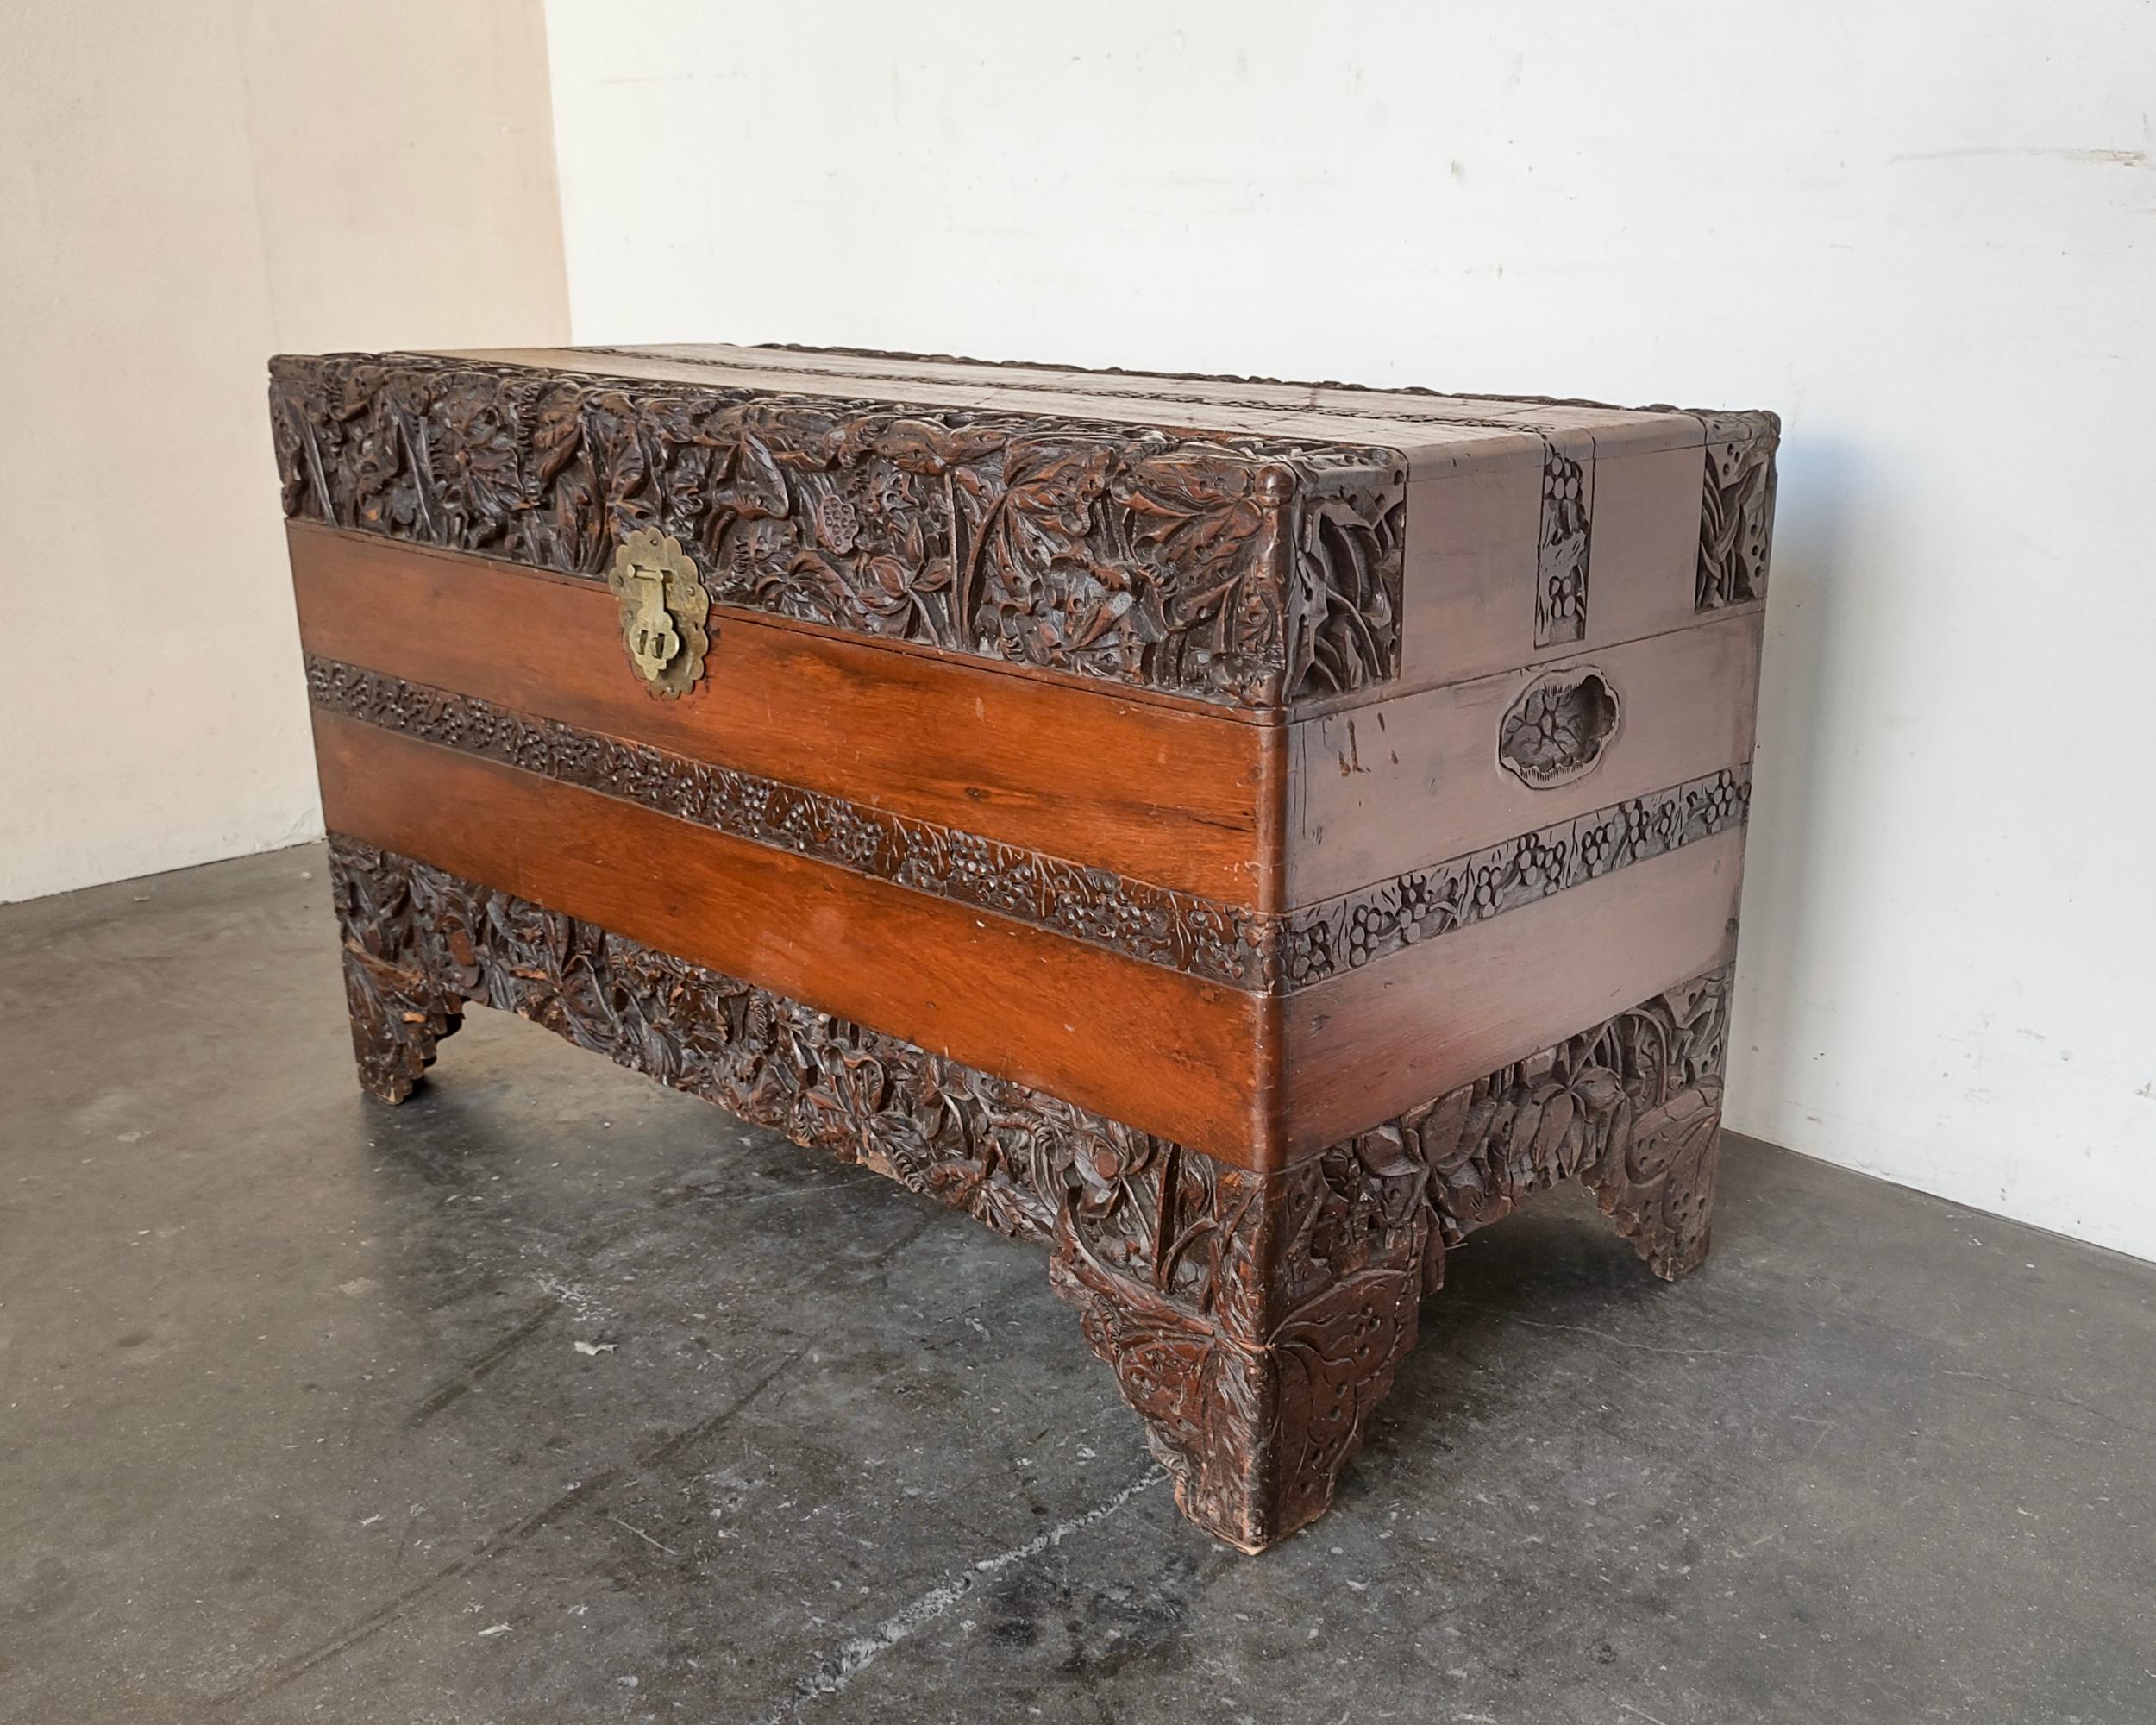 Hand-carved antique camphor wood chest. Lotus flower design, interior fragrant unfinished wood. Overall good vintage condition, wear throughout and scratches on top.

40